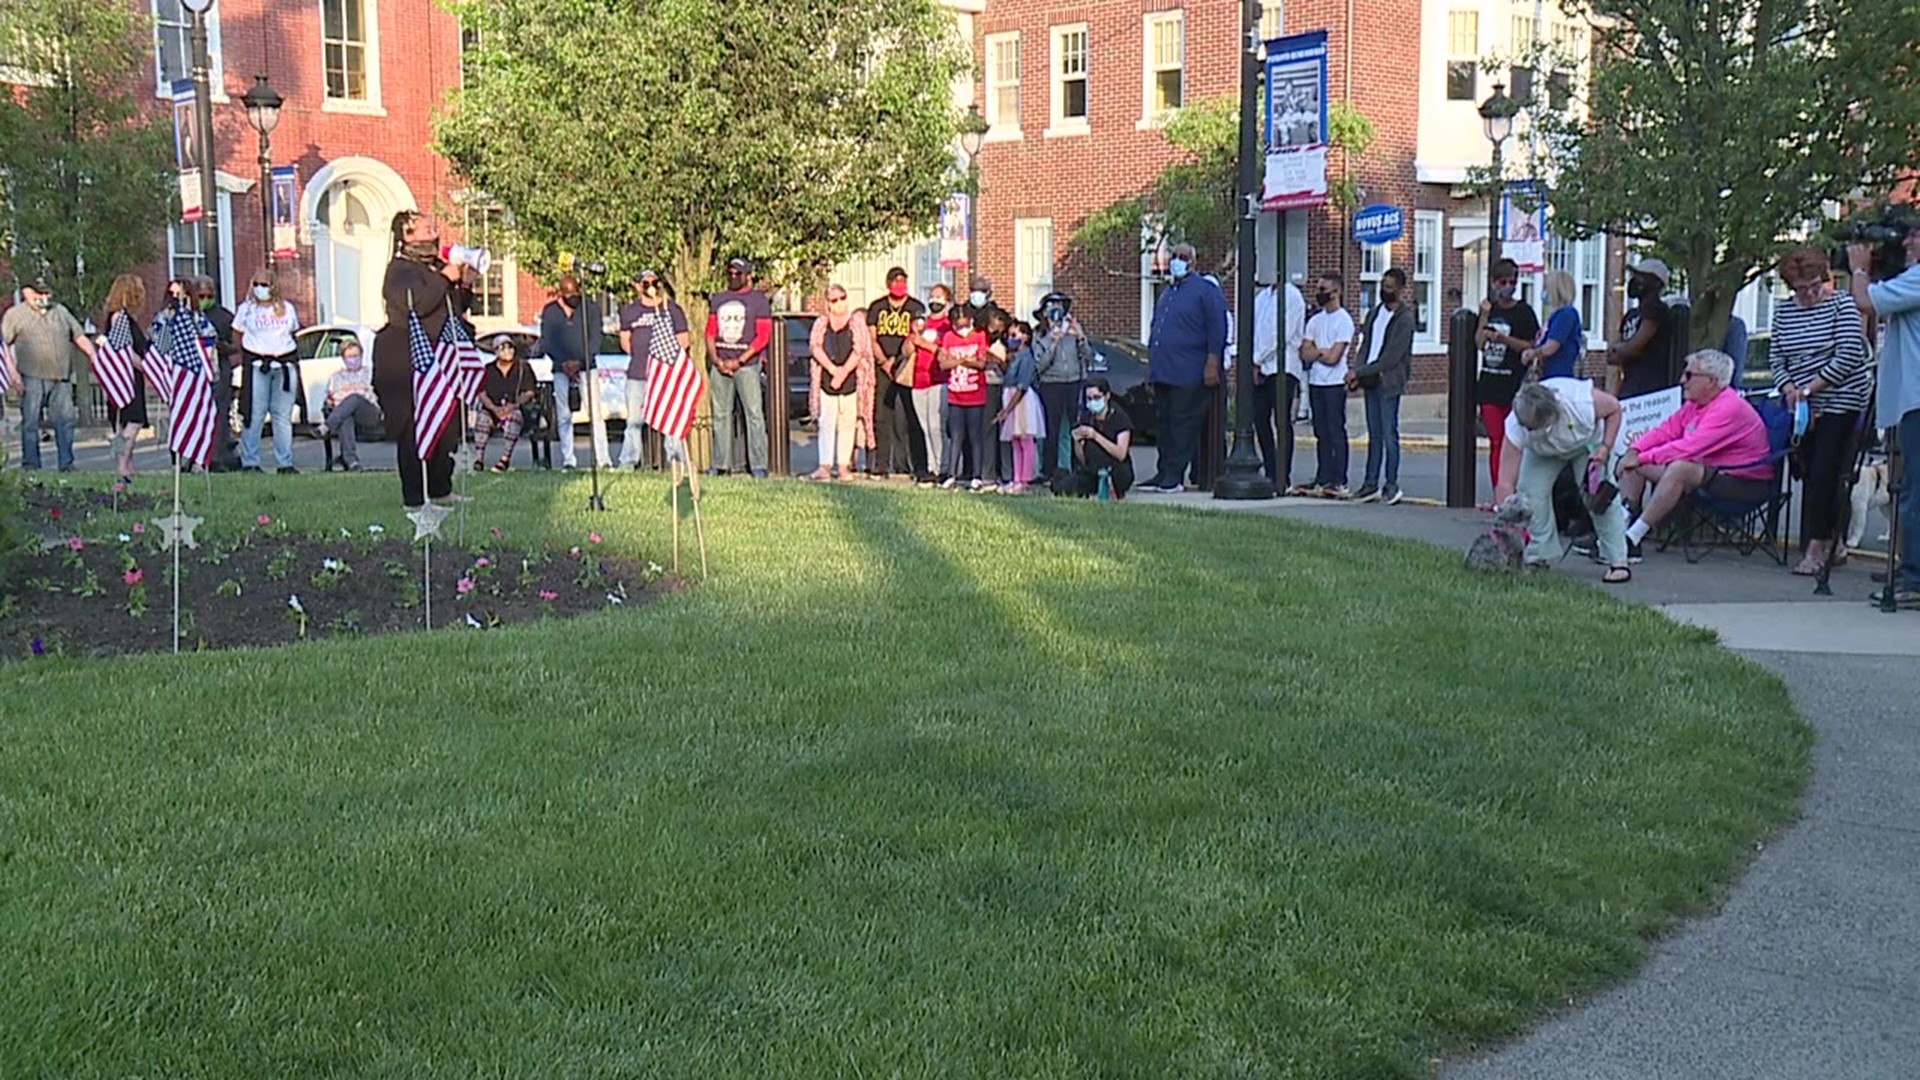 The vigil marked the one-year anniversary of the death of Floyd, who died while in the custody of Minneapolis police.